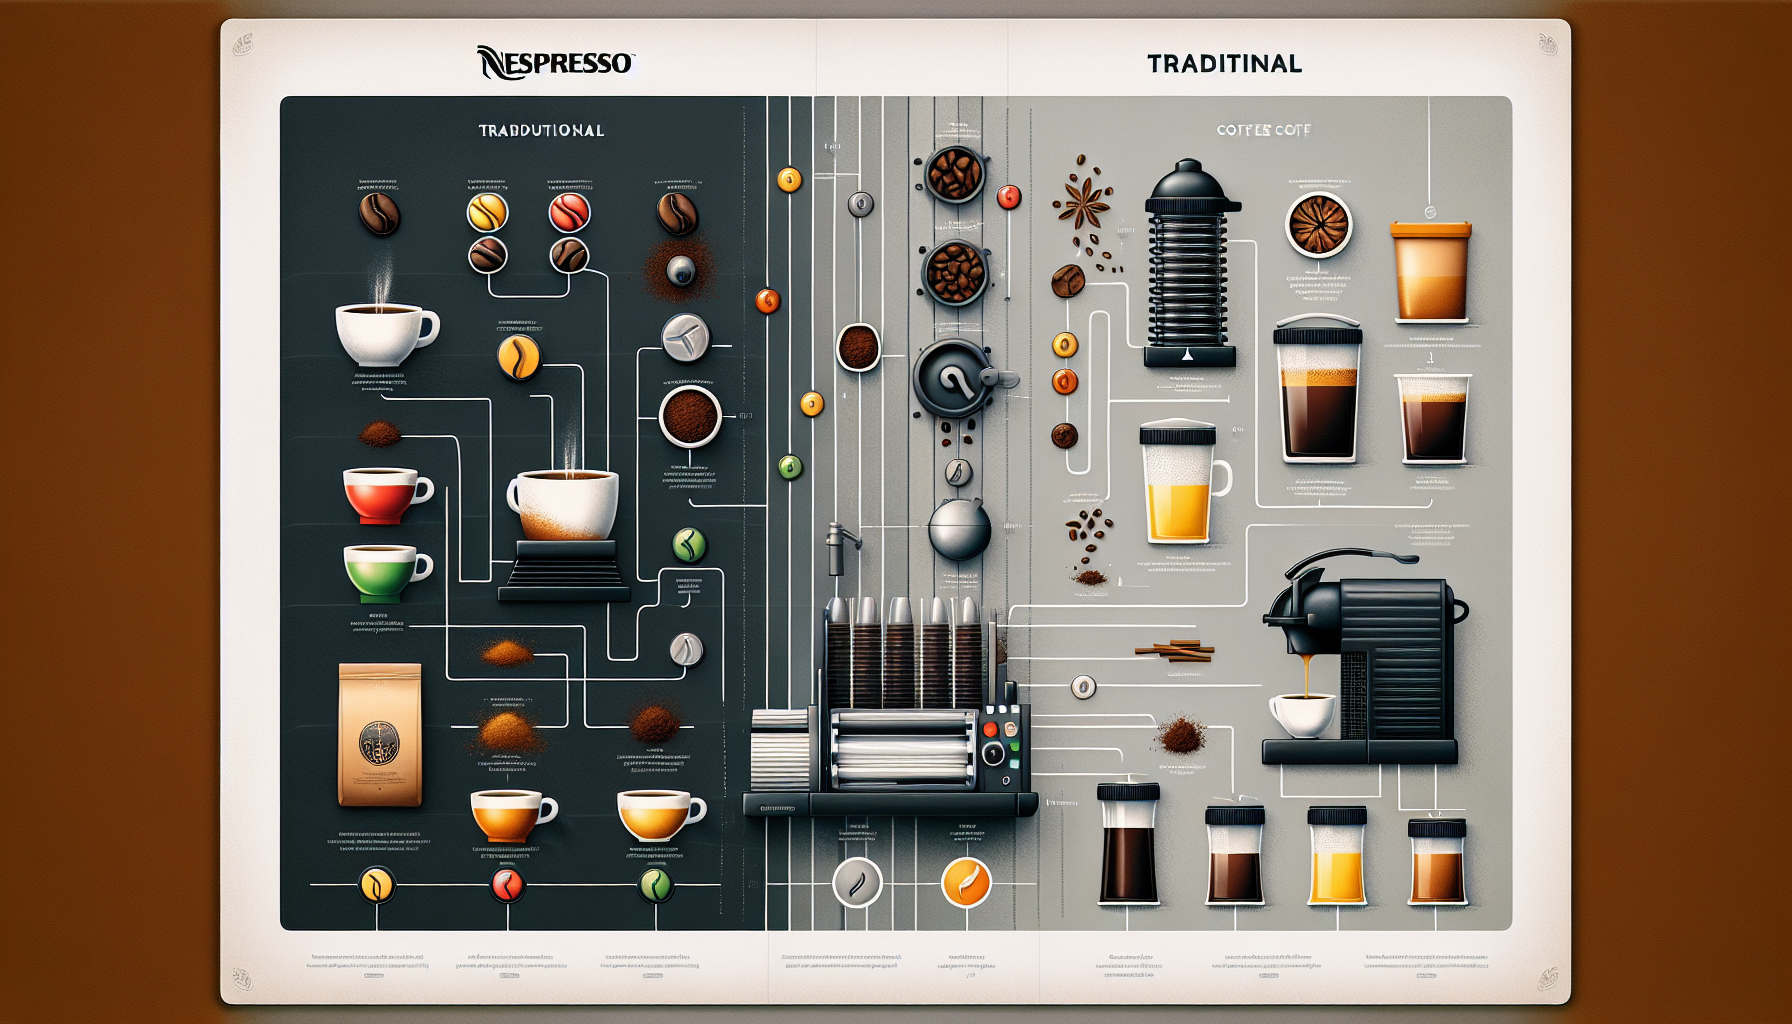 How Is Nespresso Different From Coffee?